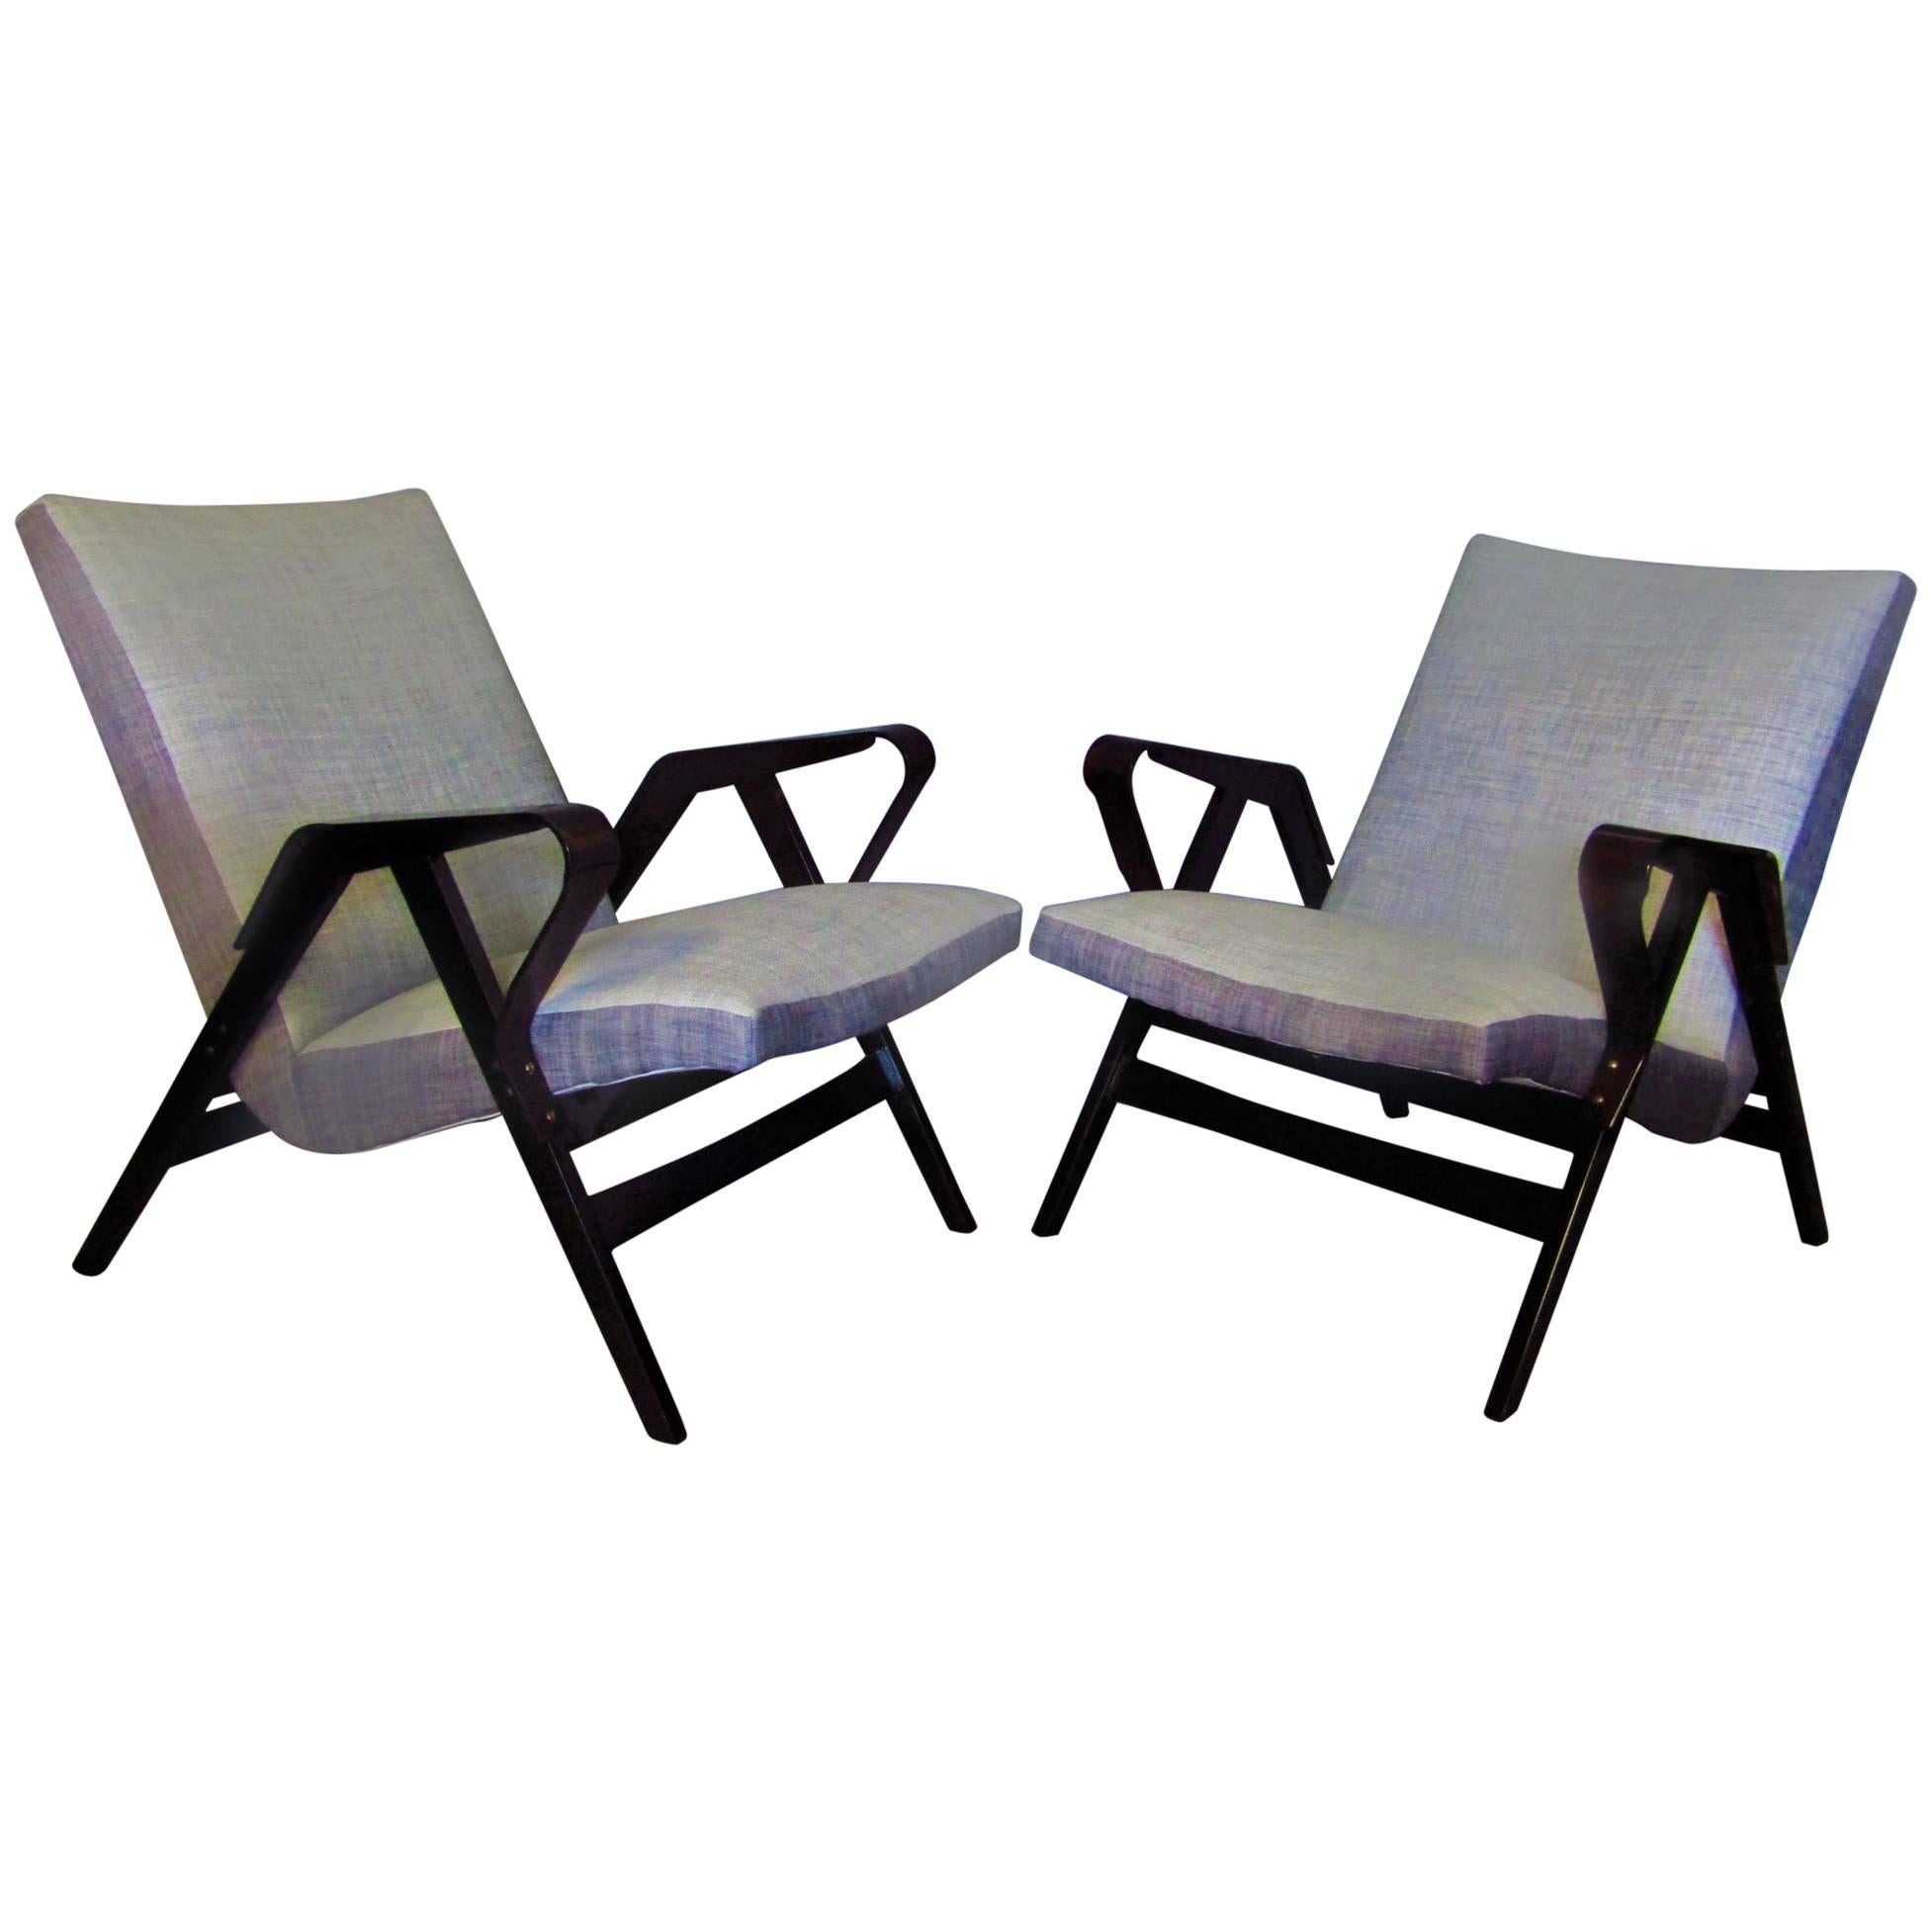 Midcentury Pair of Bent-Ply Armchairs by Tatra Nabytok, Czech, 1950s For Sale